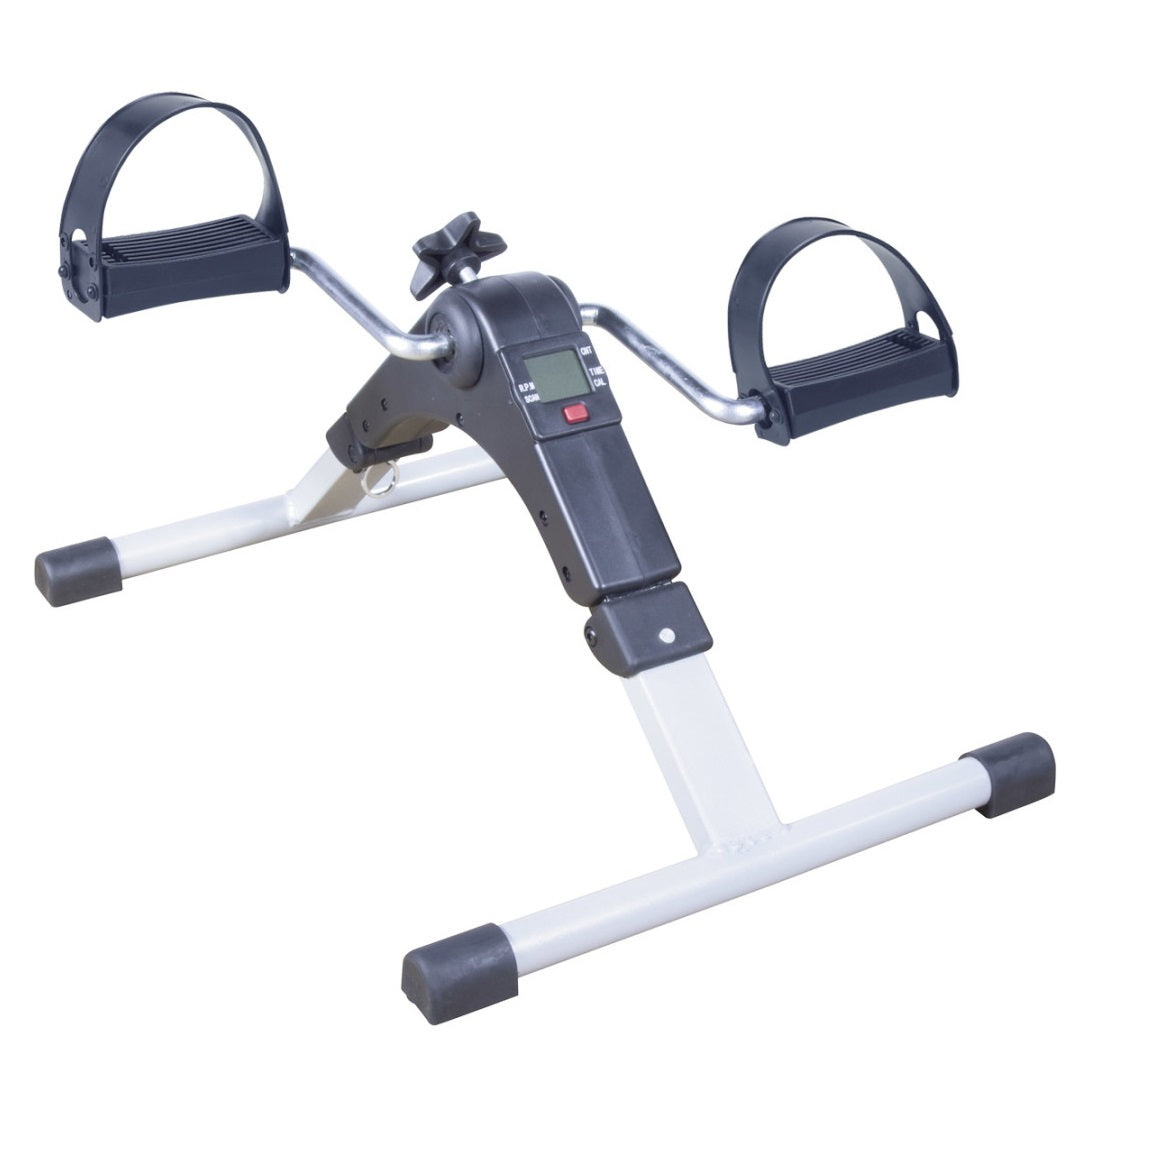 Folding Exercise Peddler with Electronic Display